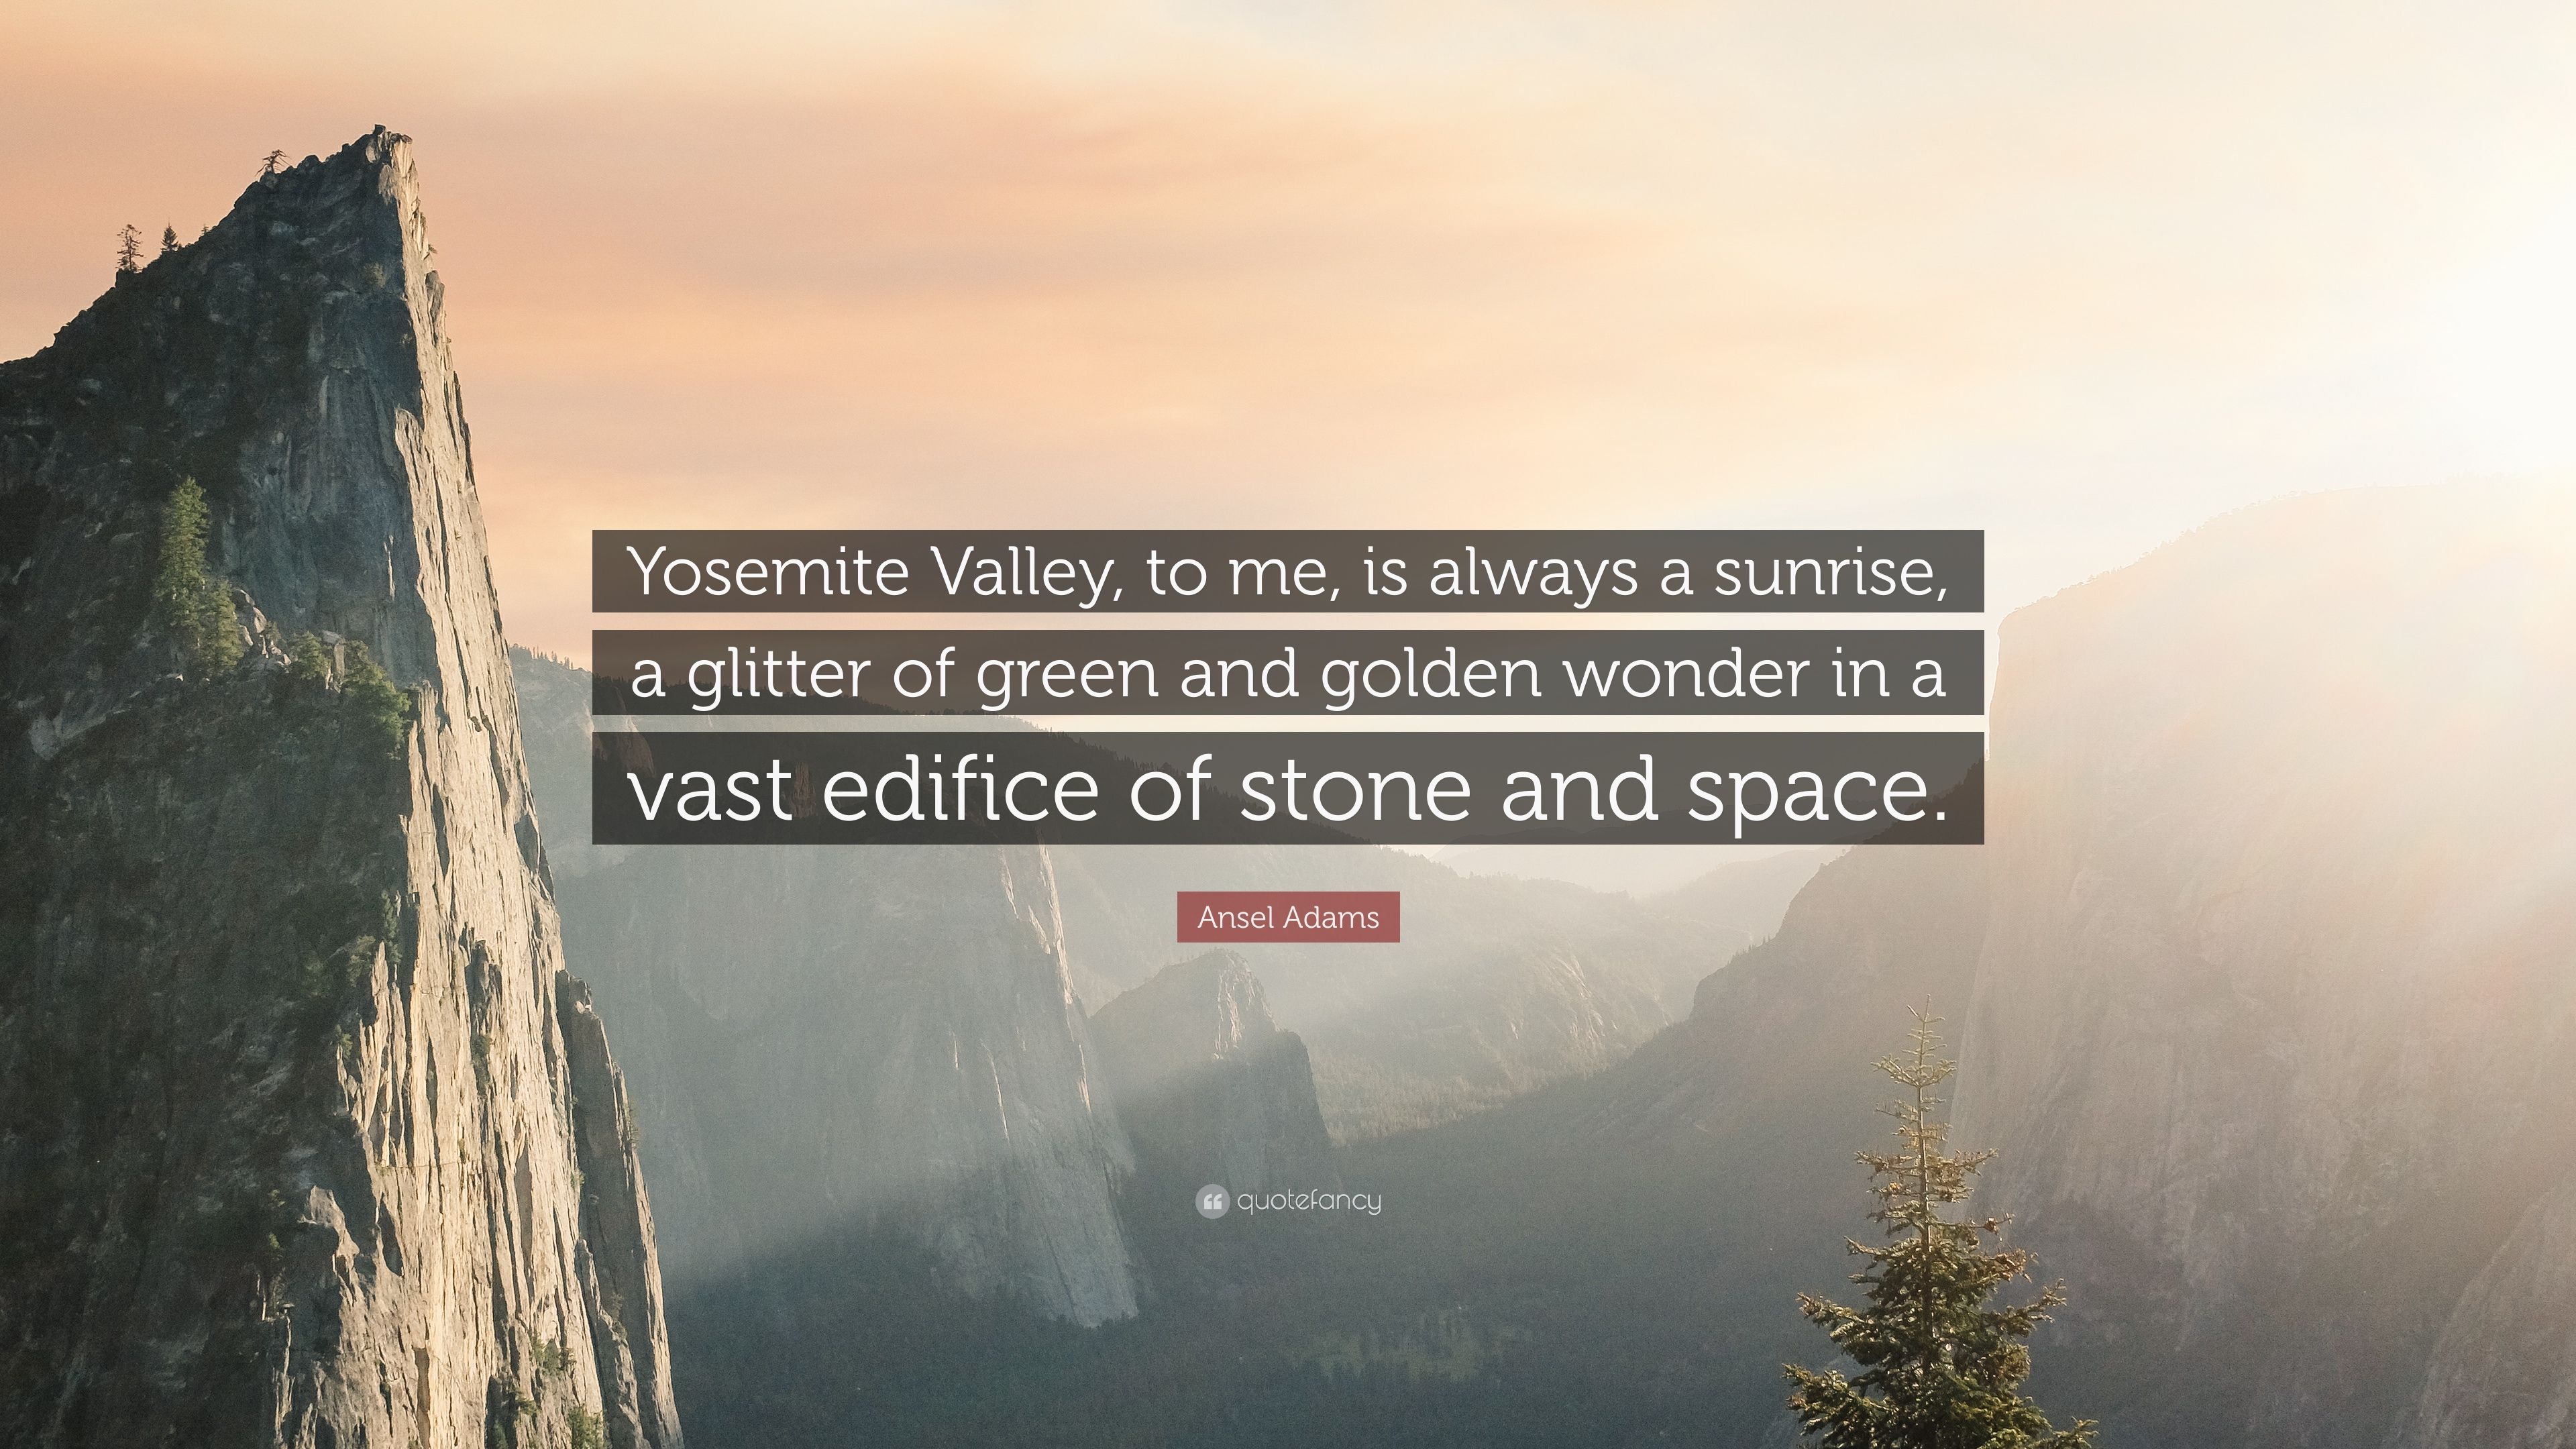 Ansel Adams Quote: “Yosemite Valley, to me, is always a sunrise, a glitter of green and golden wonder in a vast edifice of stone and space.” (7 wallpaper)